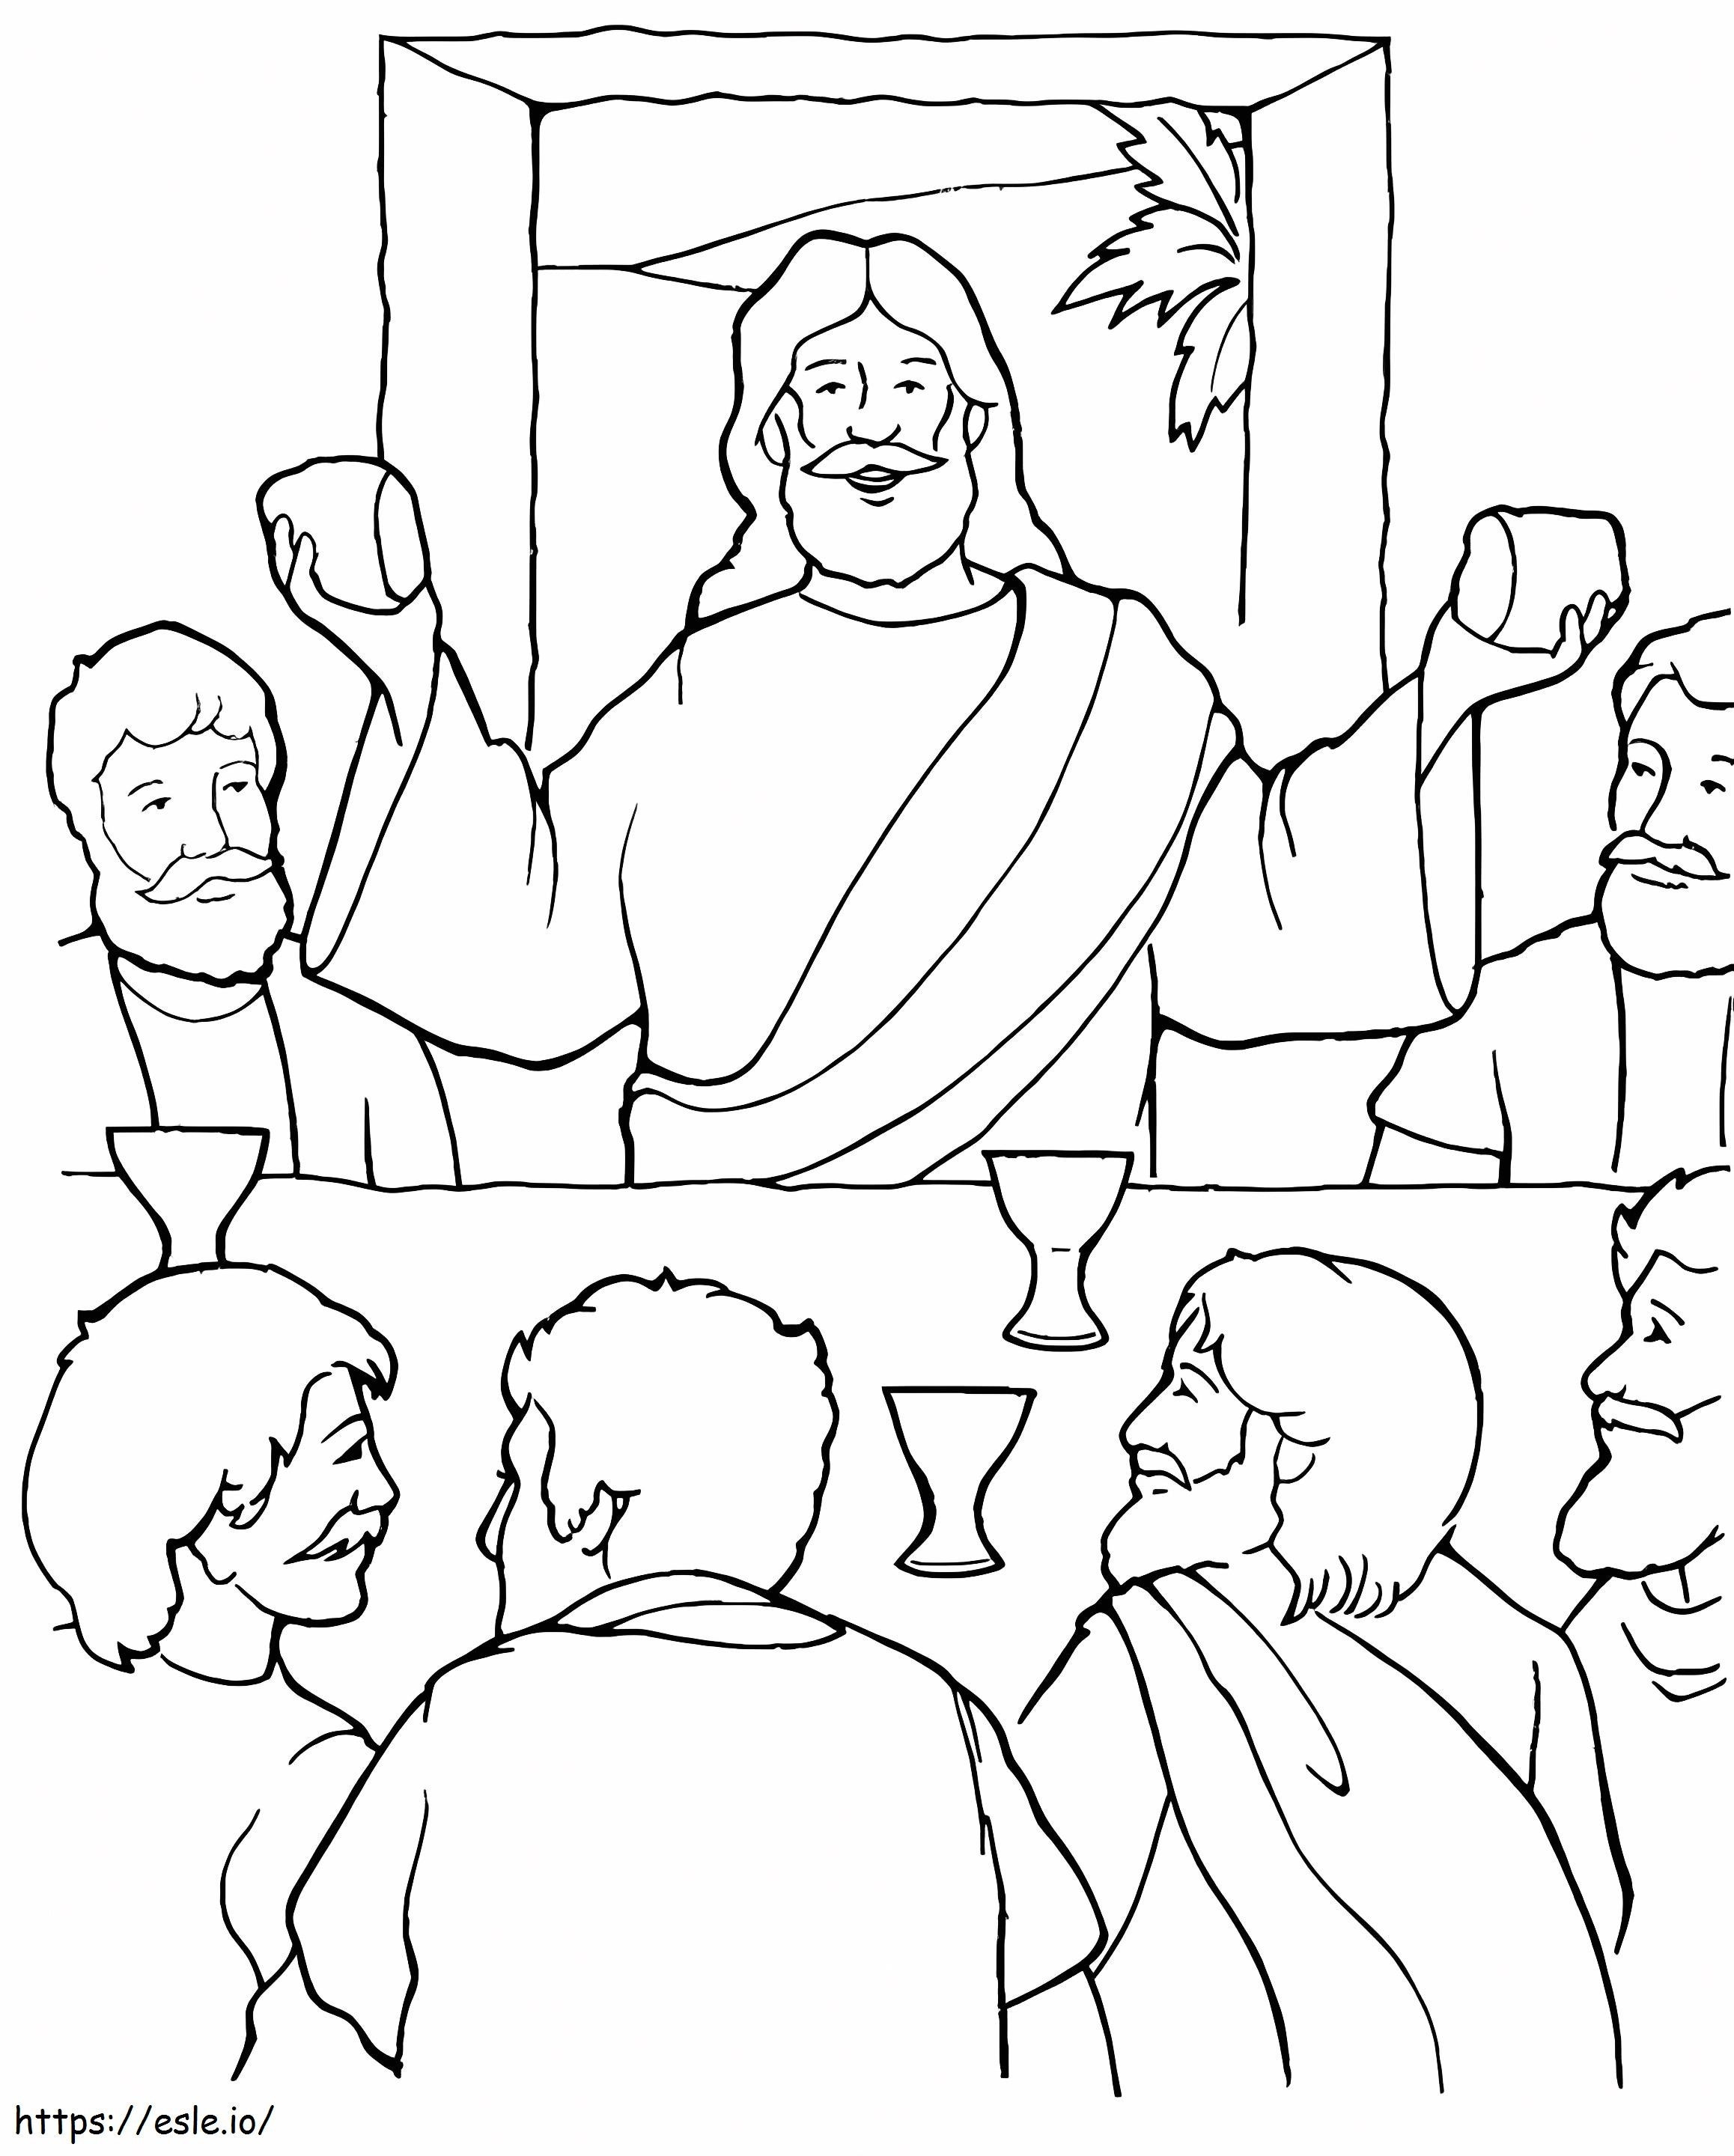 The Last Supper 5 coloring page